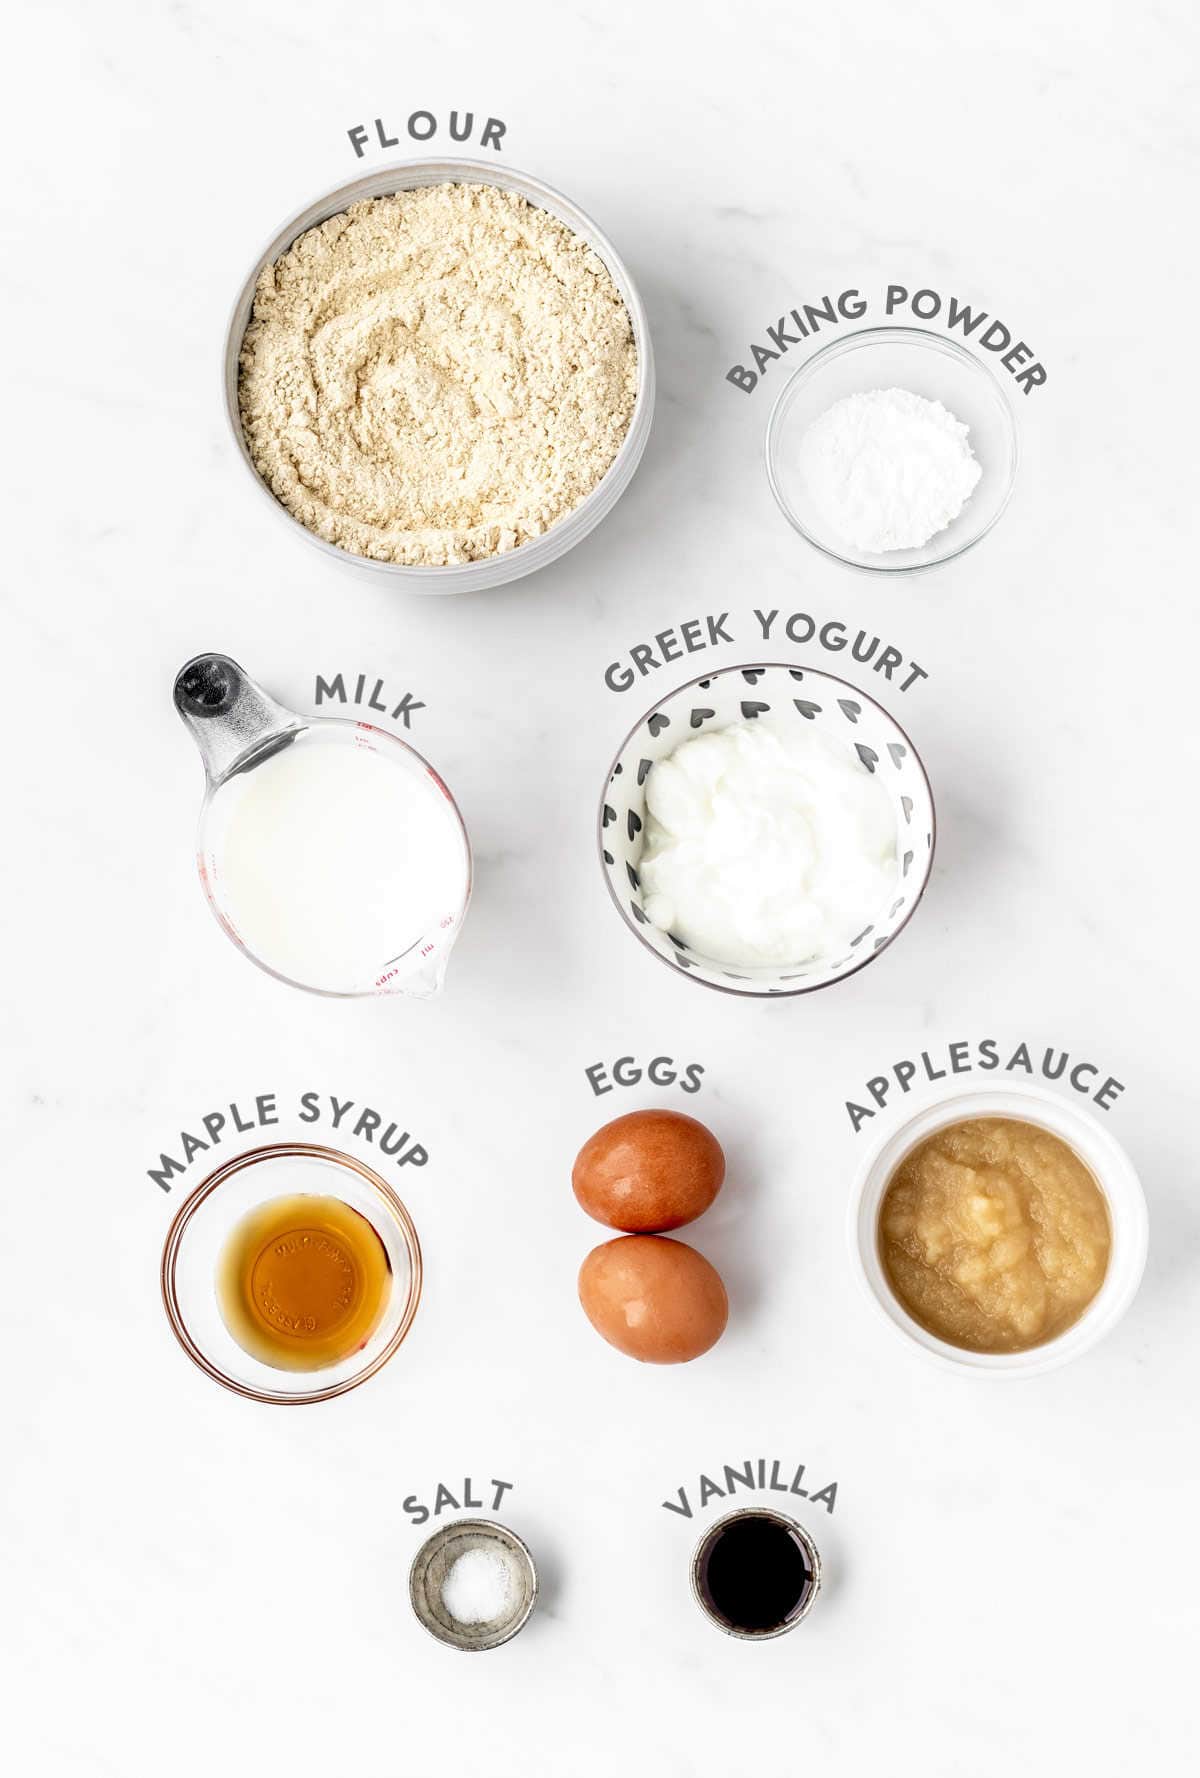 Labelled ingredients required to make pancake donut recipe.